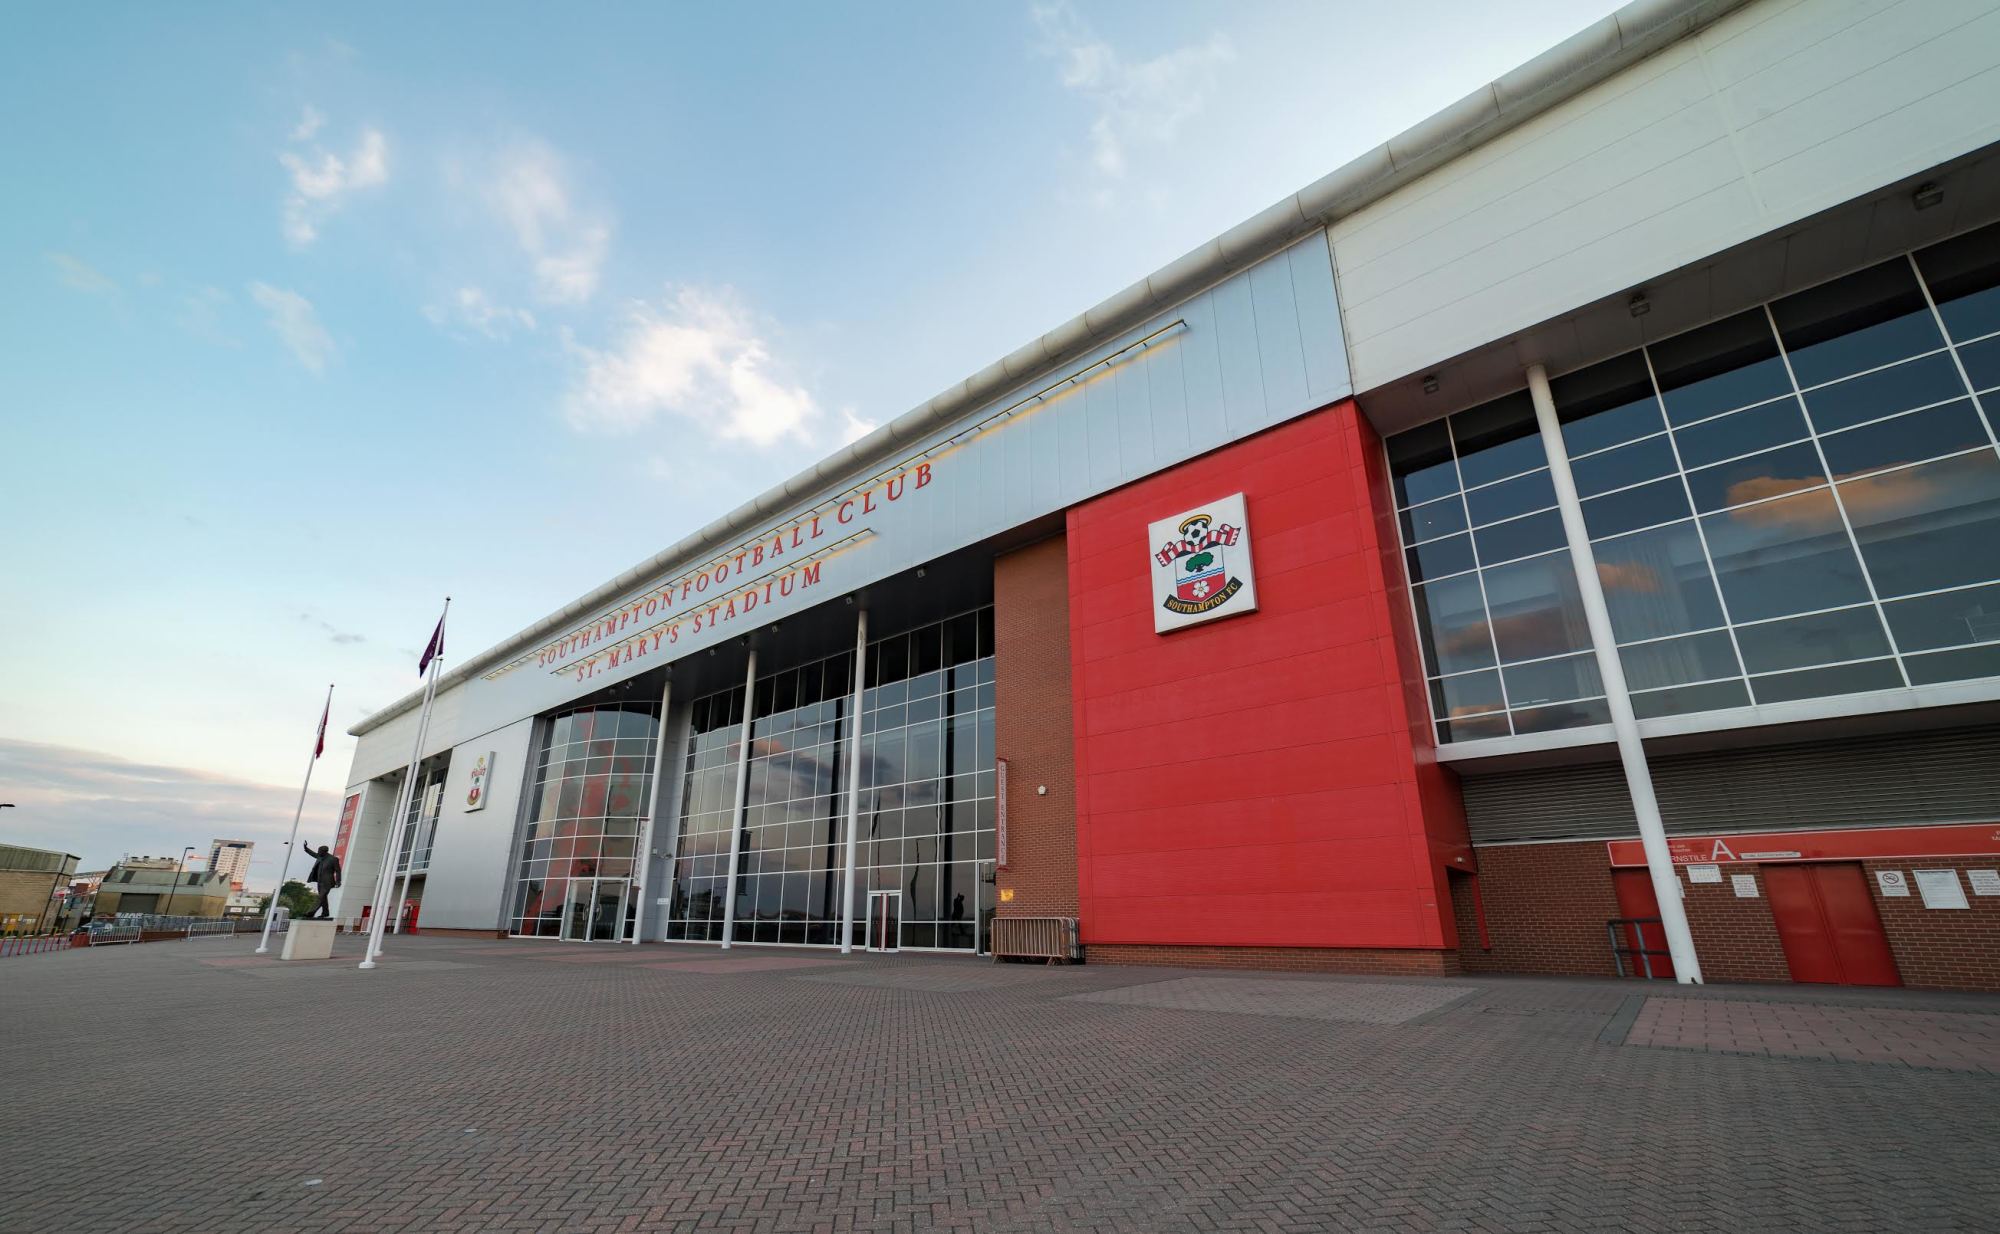 NG Bailey to Provide Maintenance Services for Southampton Football Club